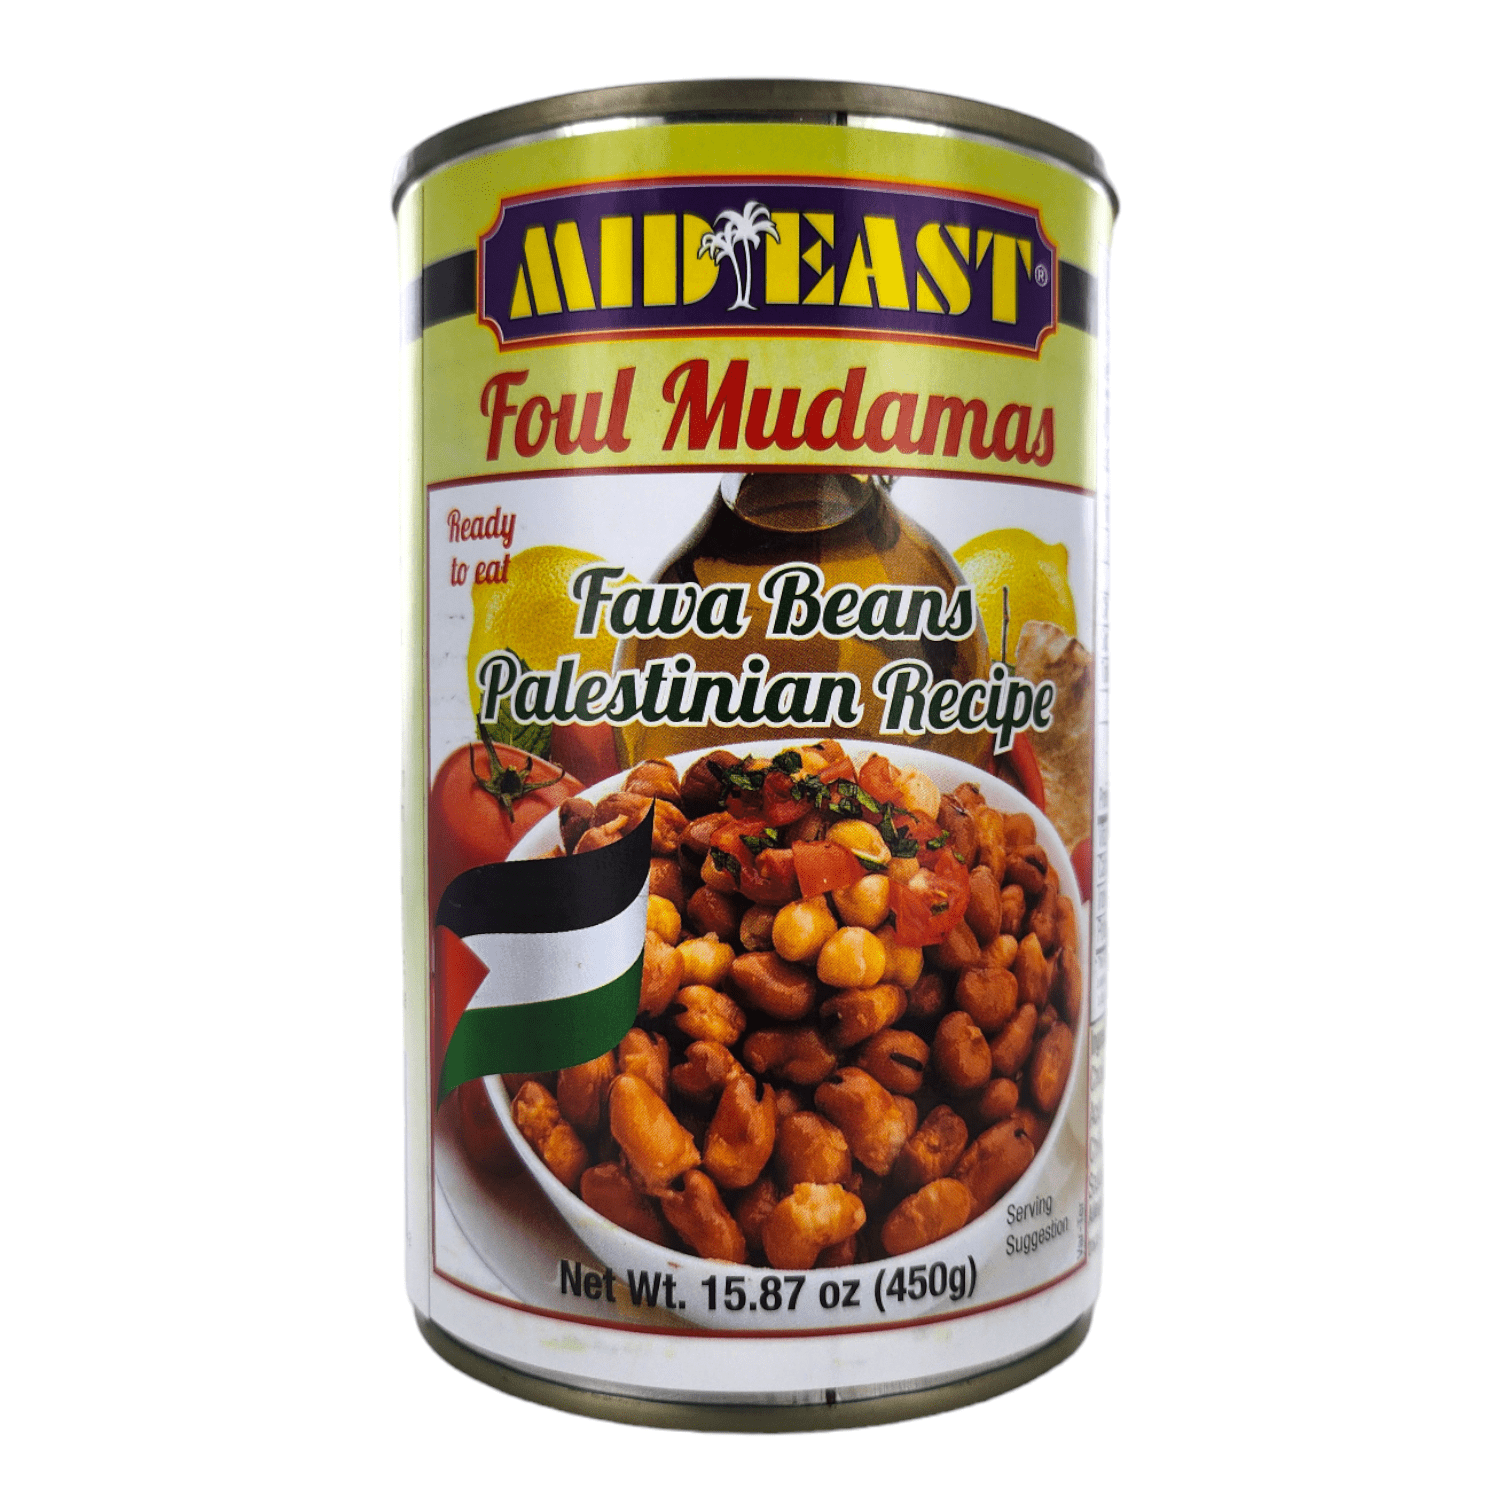 【6 Pack】 Mid East Fava Beans Palestinian Recipe (Foul Mudamas) 15.87 oz (450g) - Mideast Grocers